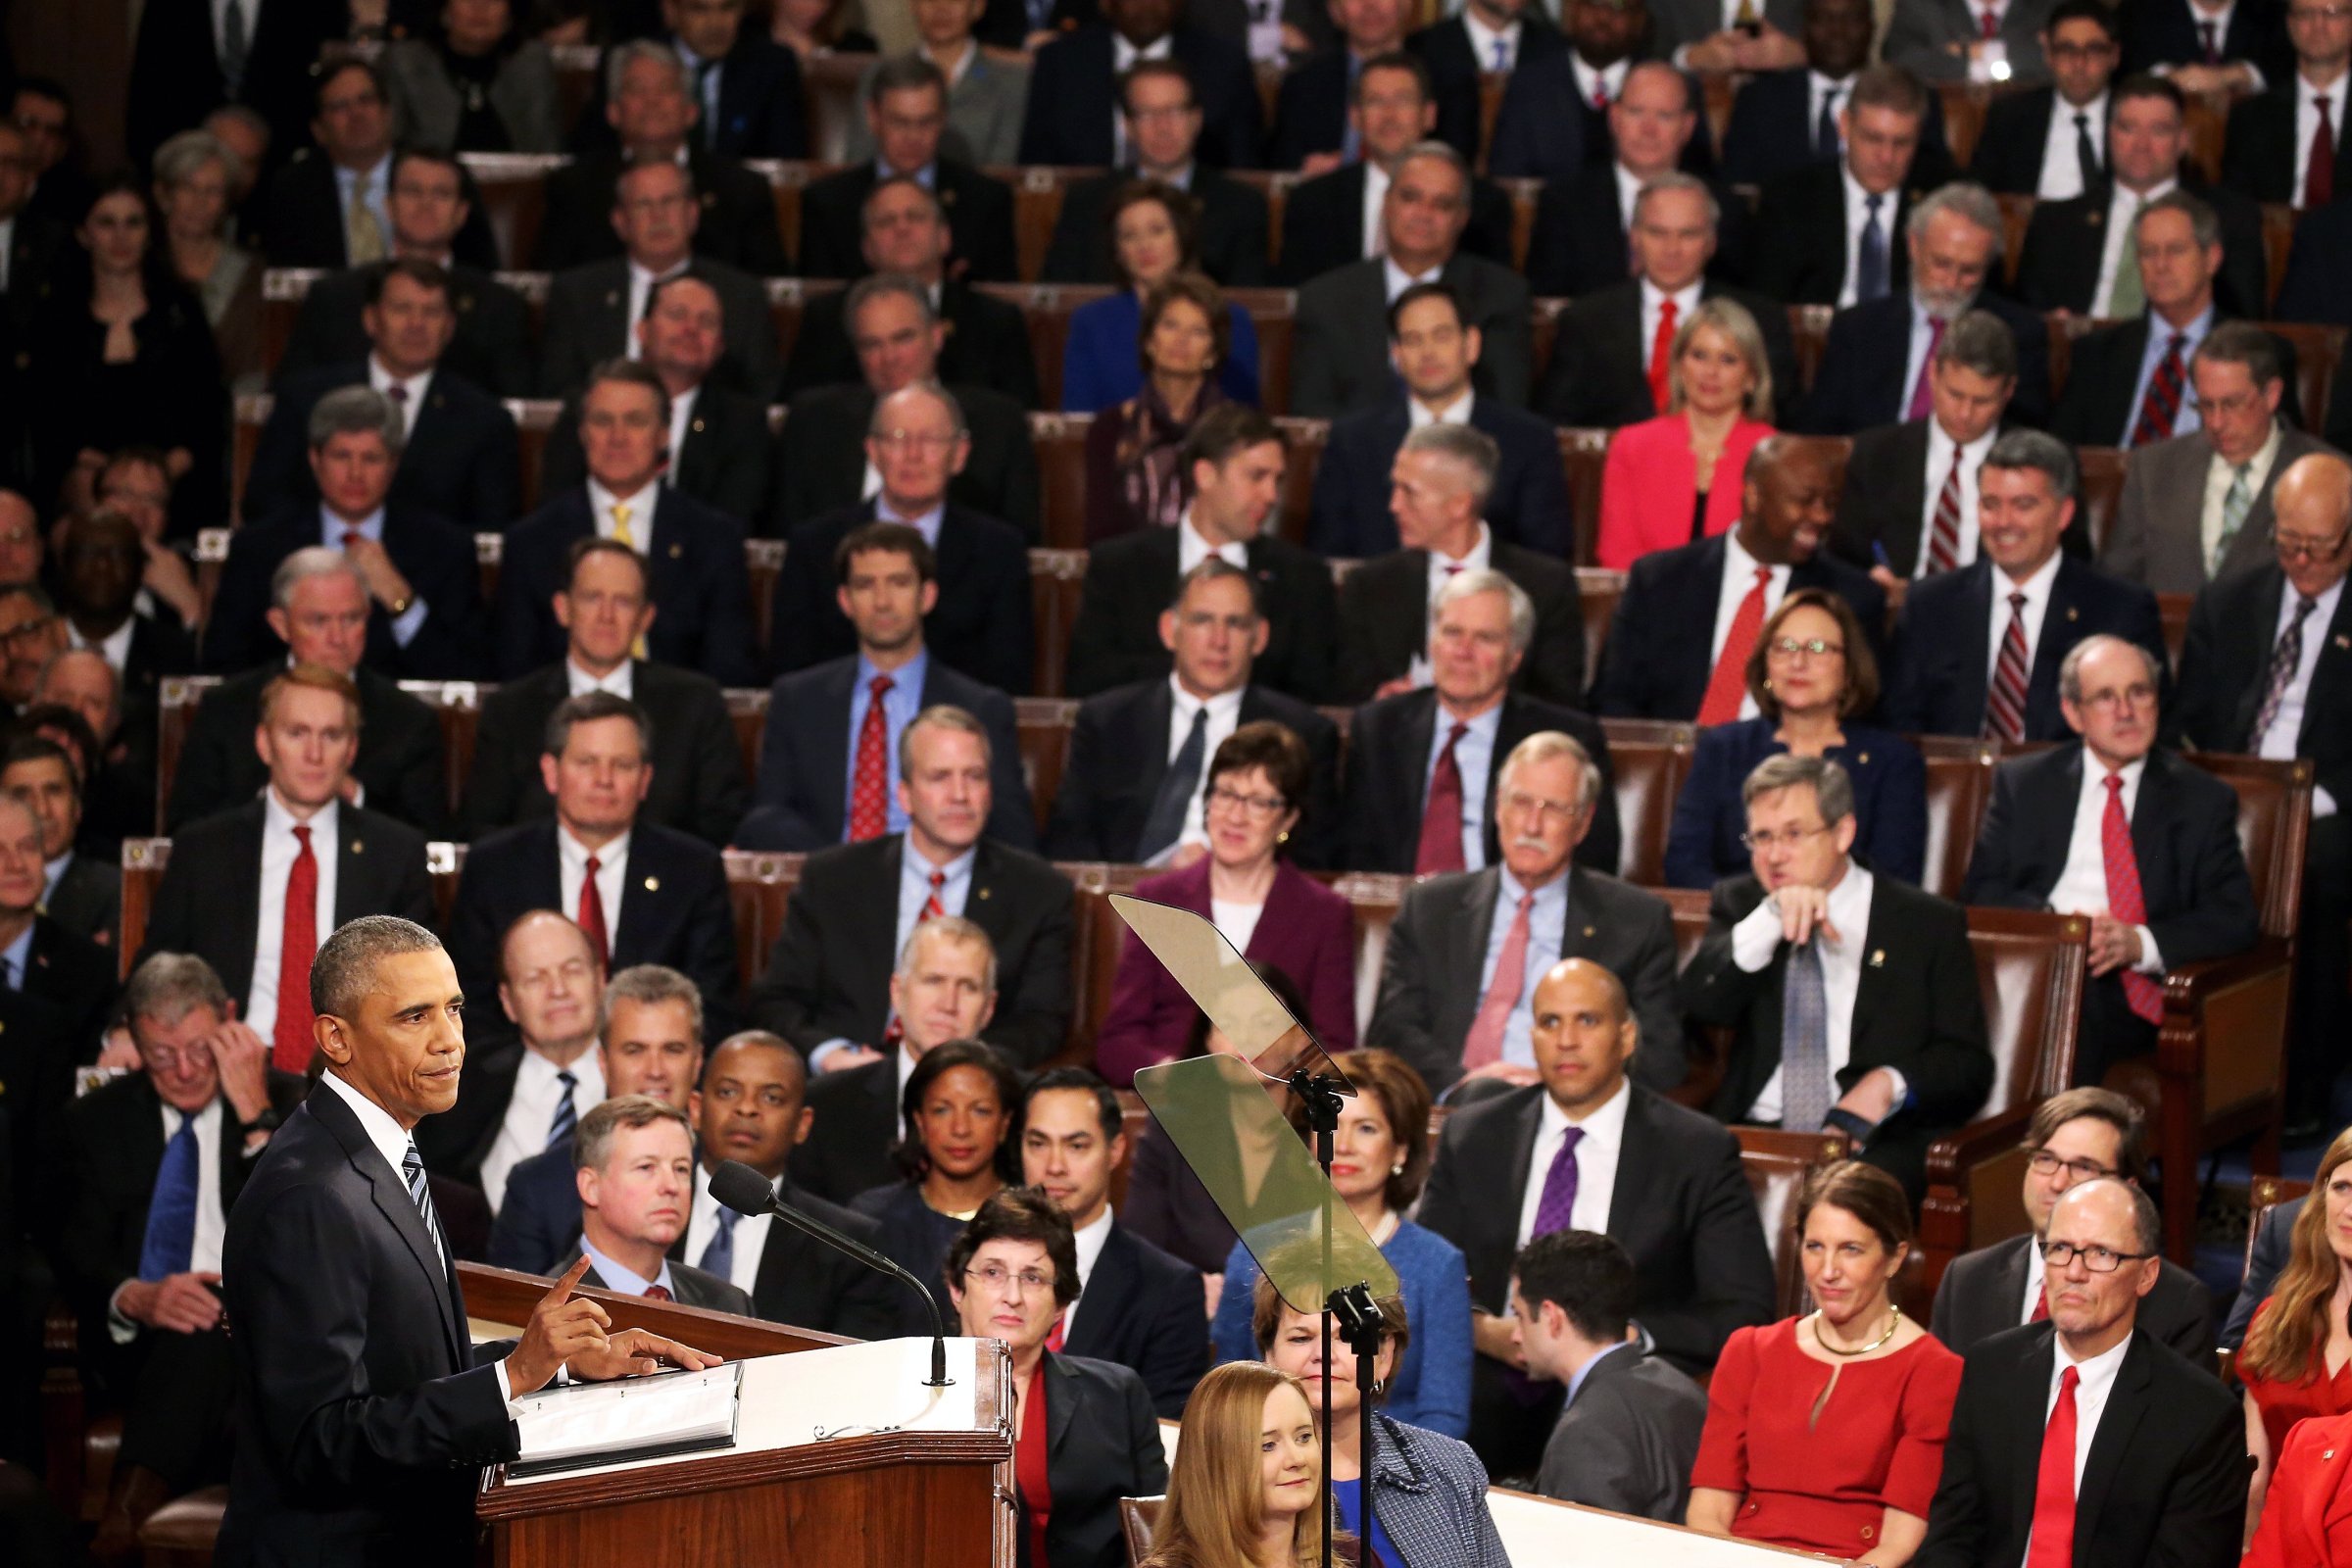 U.S. President Barack Obama delivers the State of the Union speech before members of Congress in the House chamber of the U.S. Capitol Jan.12, 2016 in Washington.